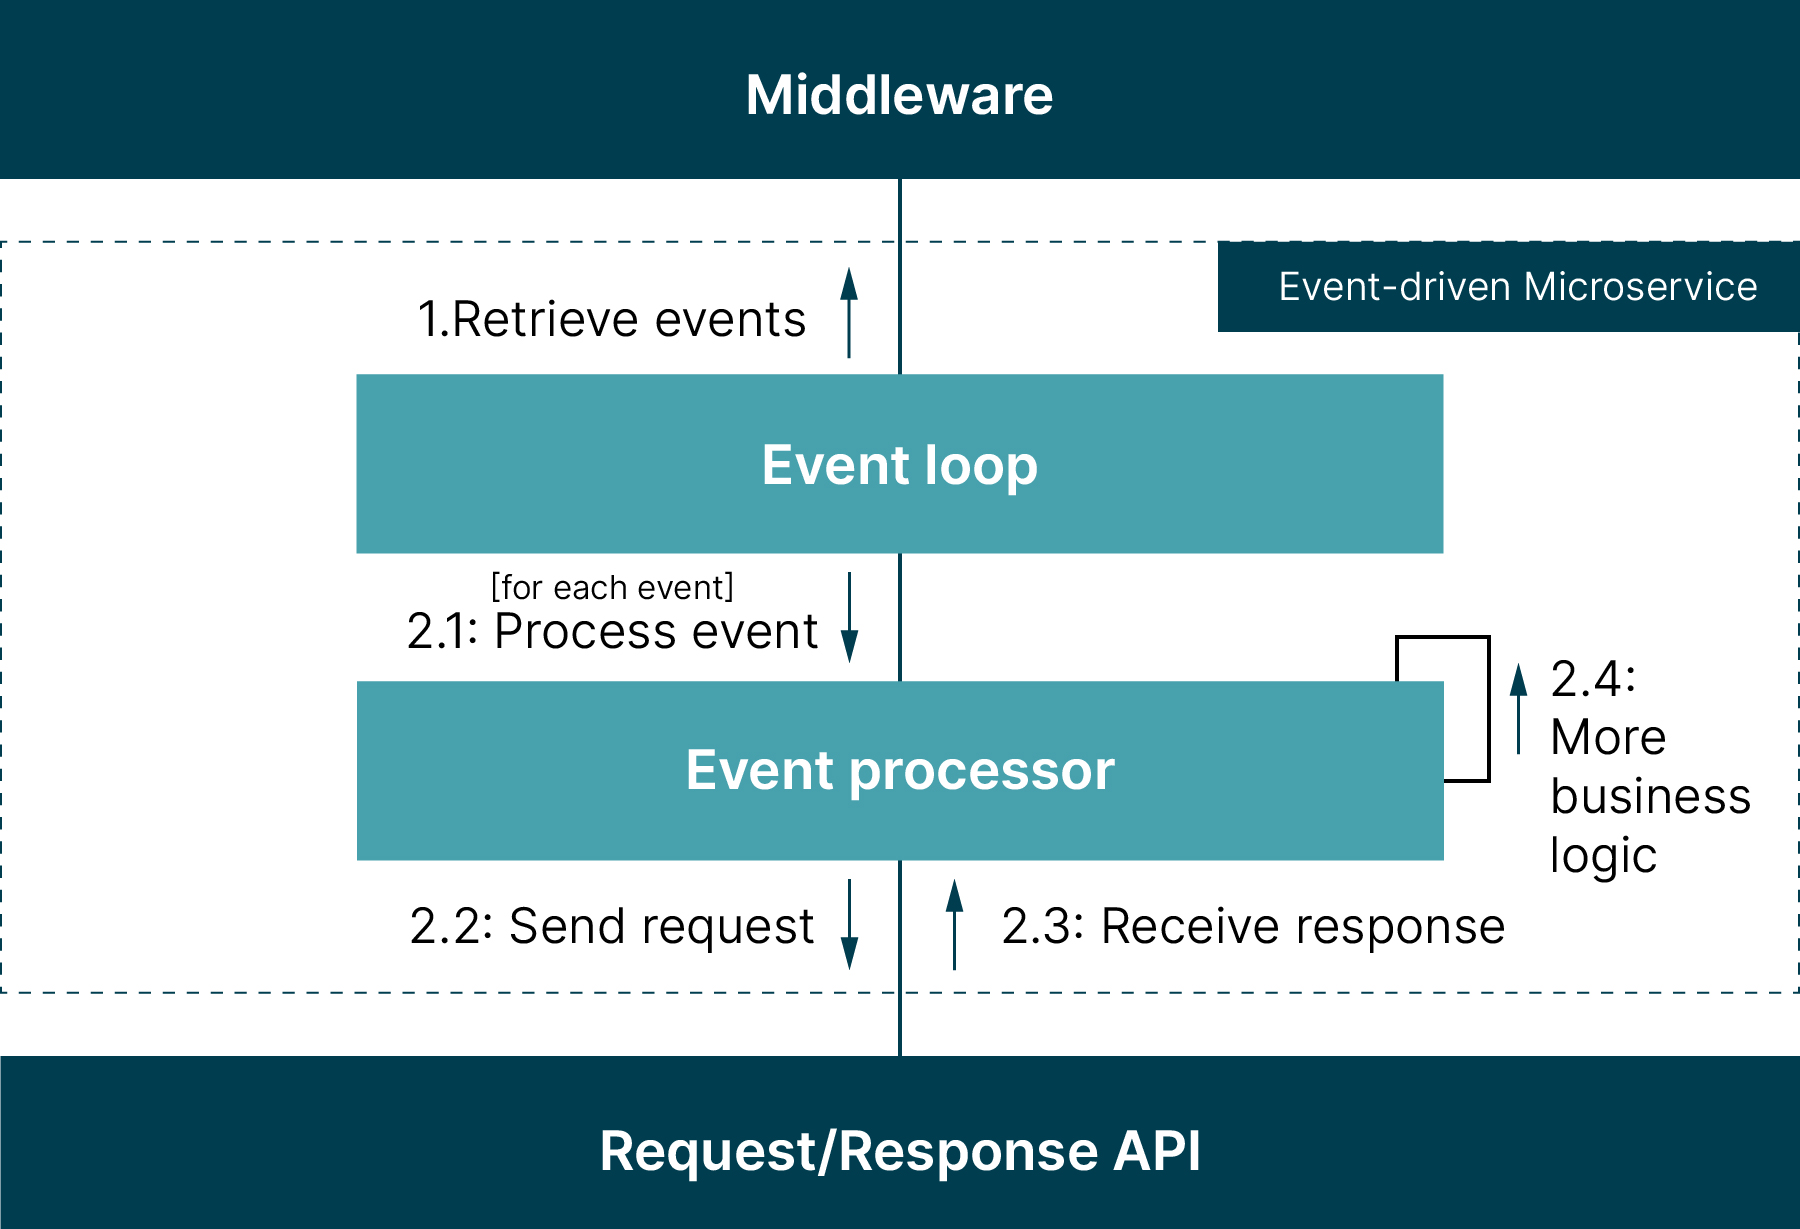 Image depicting detailed interaction between middleware, the event-driven microservice and the request/response API